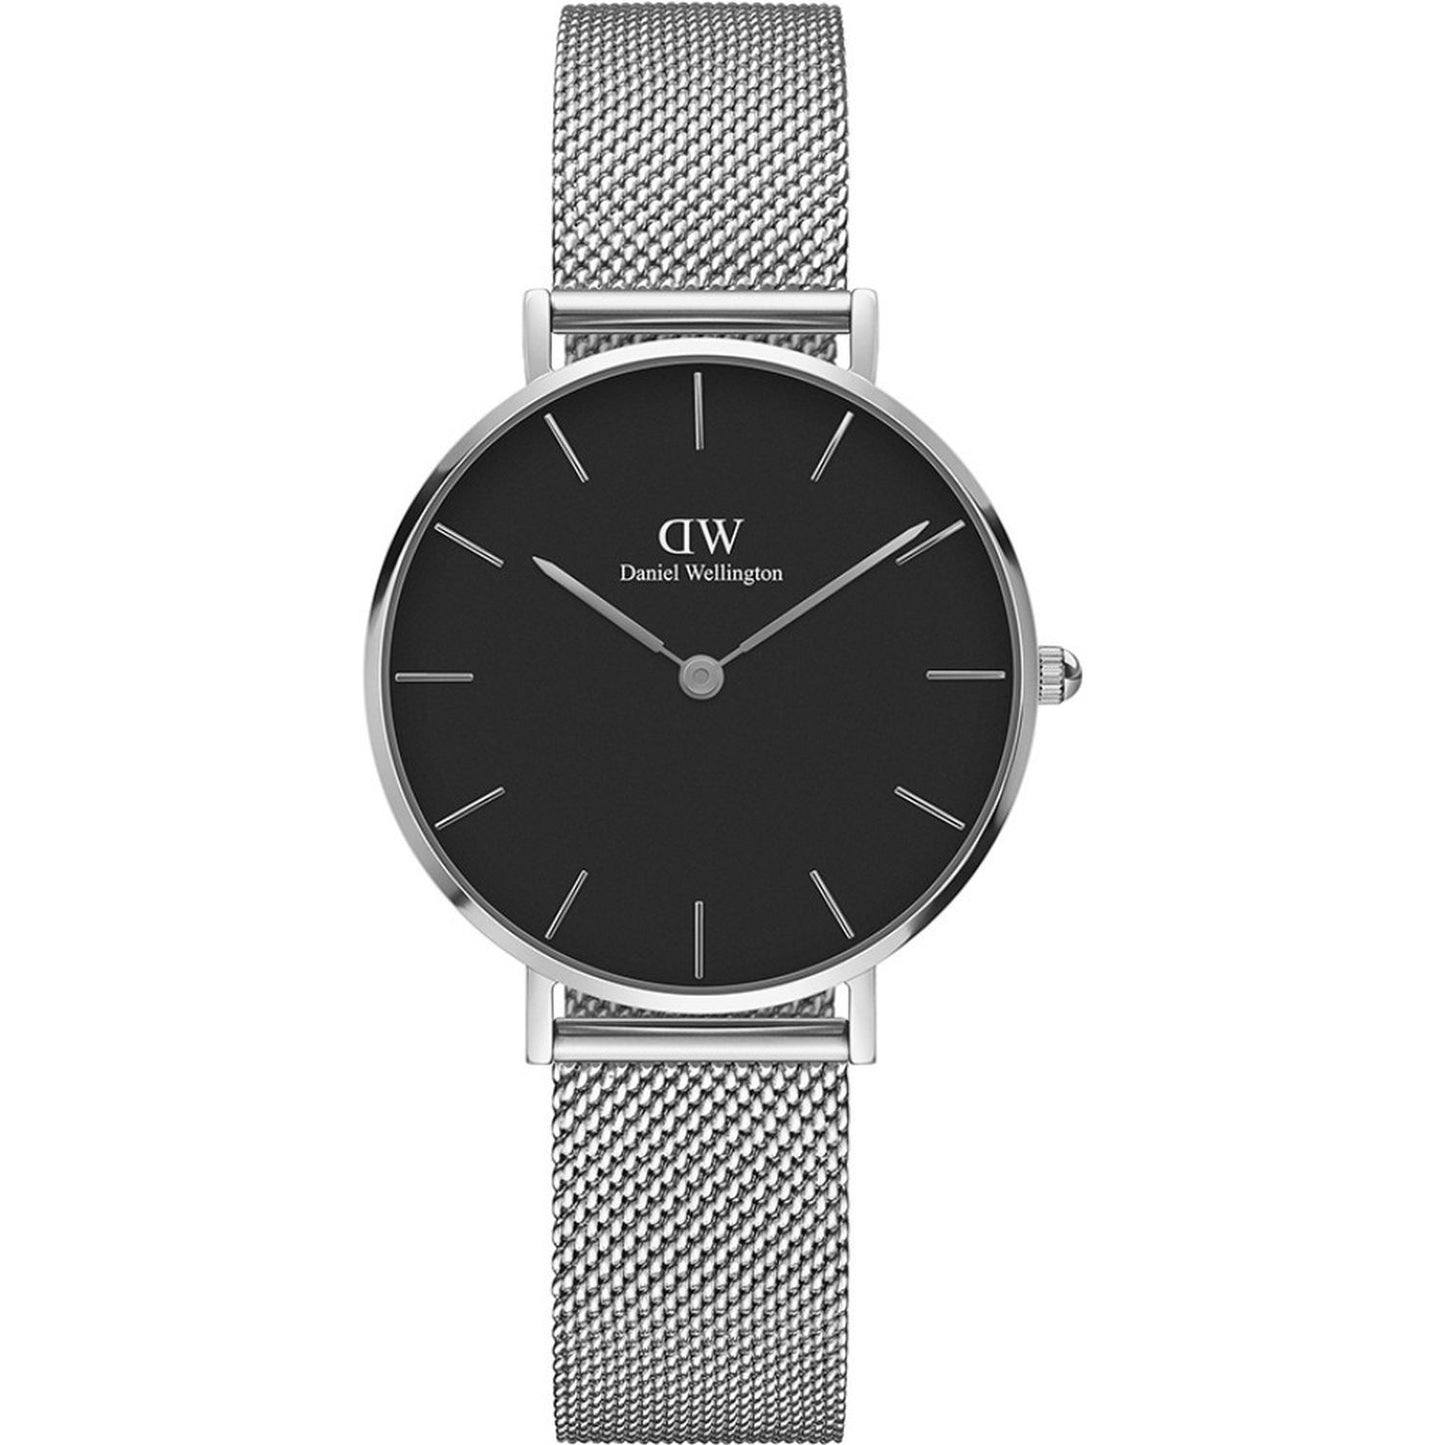 DW Classic Silver 32mm - London Time Watches 